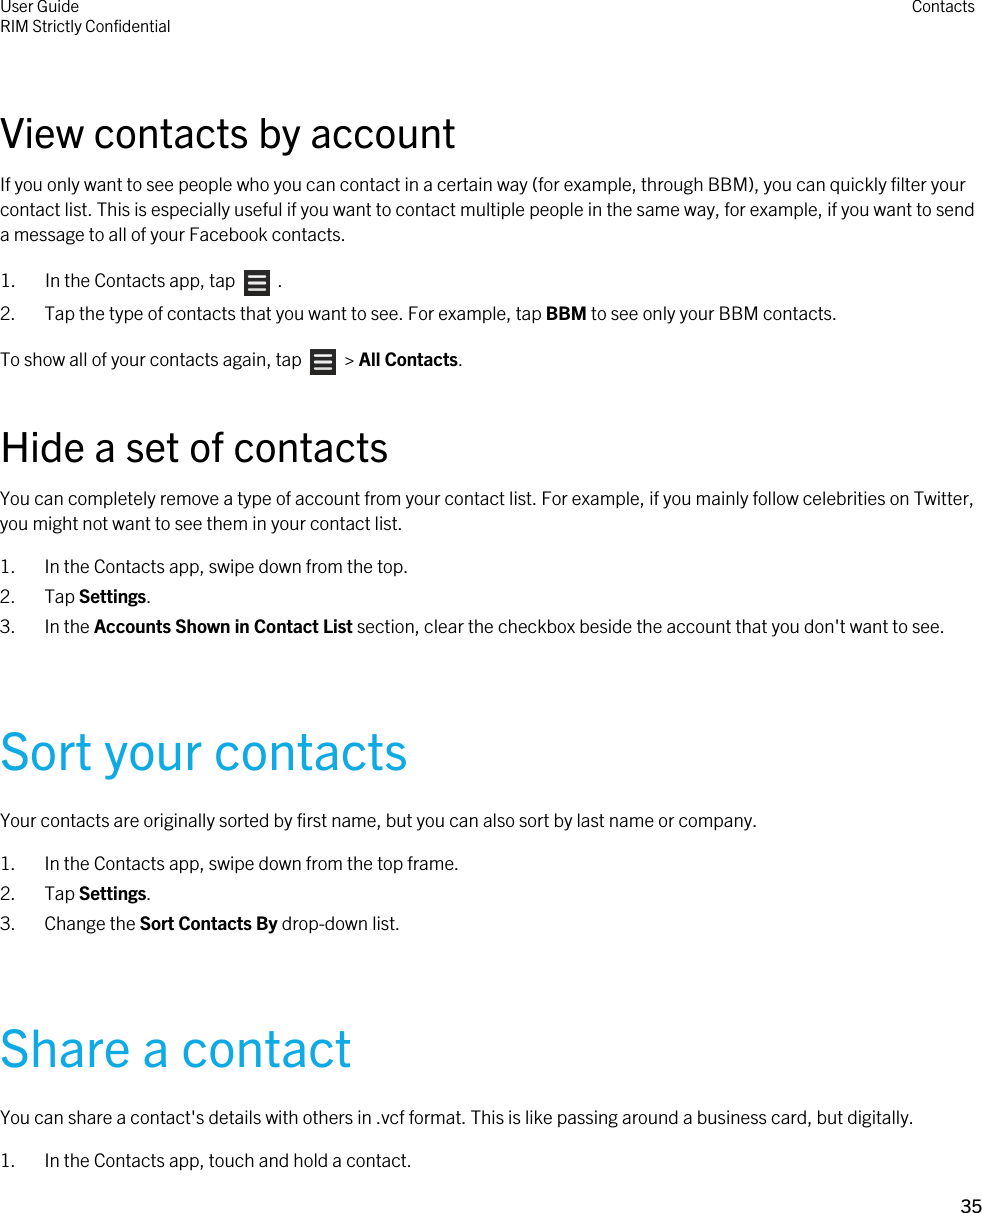 View contacts by accountIf you only want to see people who you can contact in a certain way (for example, through BBM), you can quickly filter your contact list. This is especially useful if you want to contact multiple people in the same way, for example, if you want to send a message to all of your Facebook contacts.1.  In the Contacts app, tap    .2. Tap the type of contacts that you want to see. For example, tap BBM to see only your BBM contacts.To show all of your contacts again, tap    &gt; All Contacts.Hide a set of contactsYou can completely remove a type of account from your contact list. For example, if you mainly follow celebrities on Twitter, you might not want to see them in your contact list.1. In the Contacts app, swipe down from the top.2. Tap Settings.3. In the Accounts Shown in Contact List section, clear the checkbox beside the account that you don&apos;t want to see.Sort your contactsYour contacts are originally sorted by first name, but you can also sort by last name or company.1. In the Contacts app, swipe down from the top frame.2. Tap Settings.3. Change the Sort Contacts By drop-down list.Share a contactYou can share a contact&apos;s details with others in .vcf format. This is like passing around a business card, but digitally.1. In the Contacts app, touch and hold a contact.User GuideRIM Strictly Confidential Contacts35 